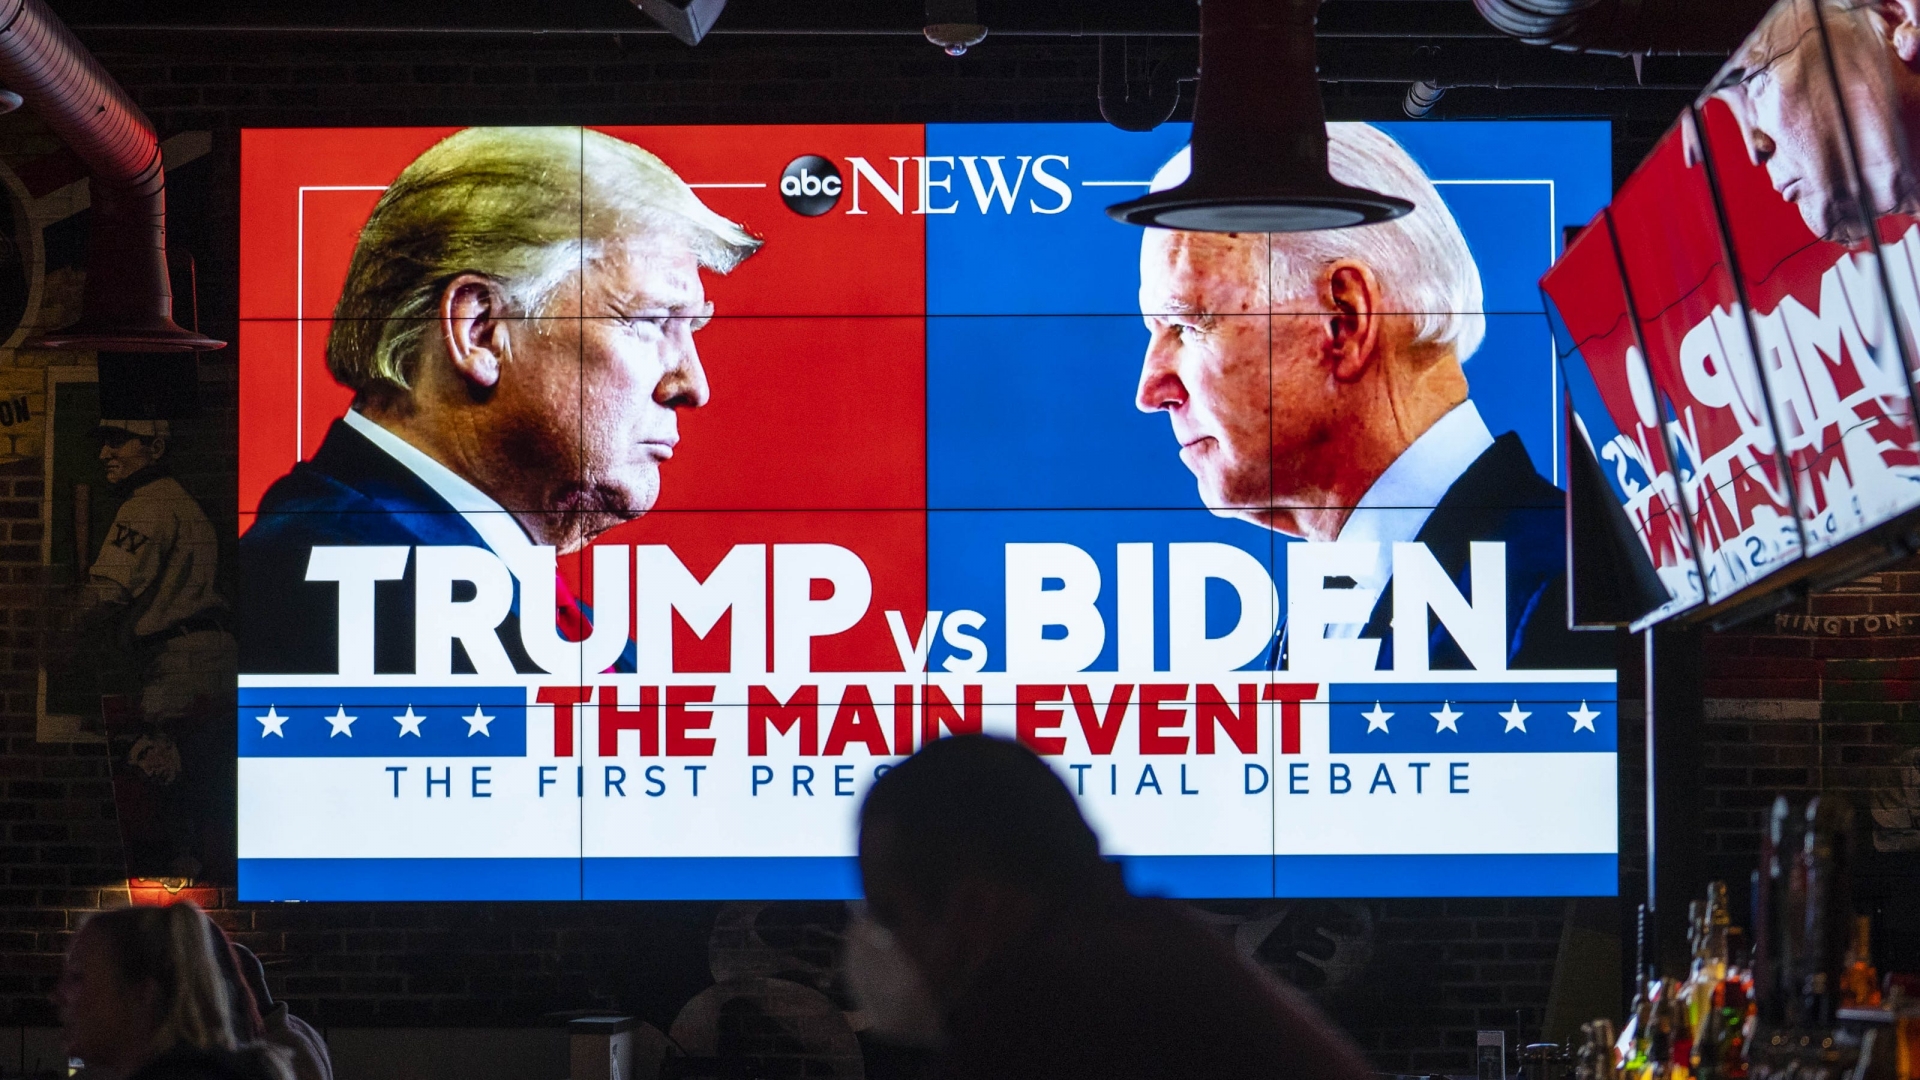 A new poll shows Democratic nominee Joe Biden with a 14 point lead nationally over President Trump, following the first presidential debate last week